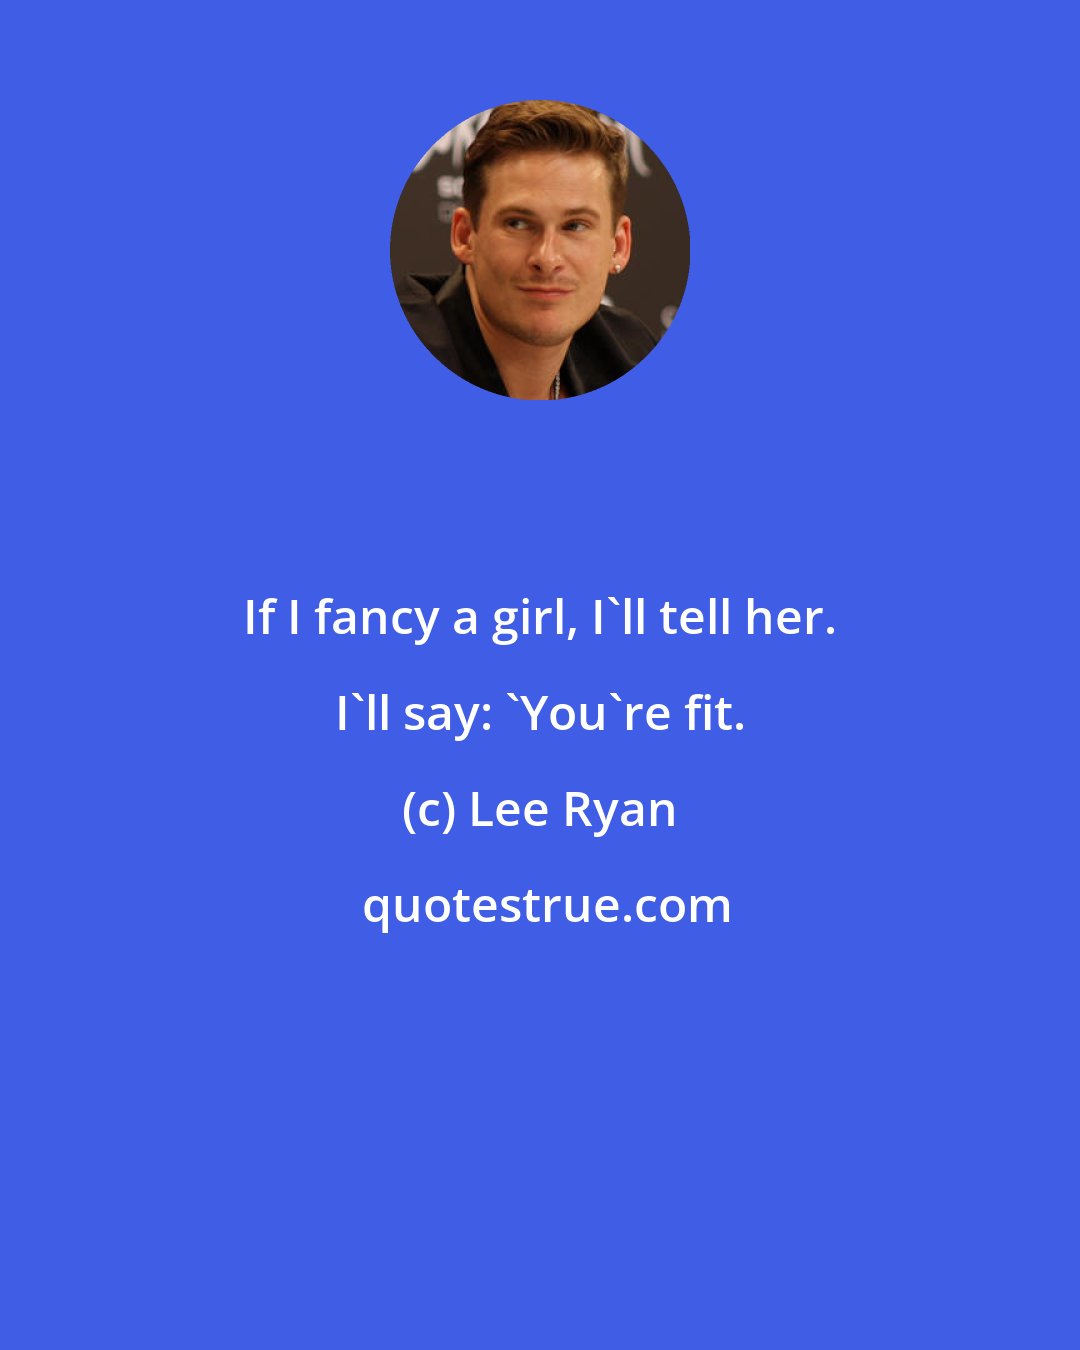 Lee Ryan: If I fancy a girl, I'll tell her. I'll say: 'You're fit.